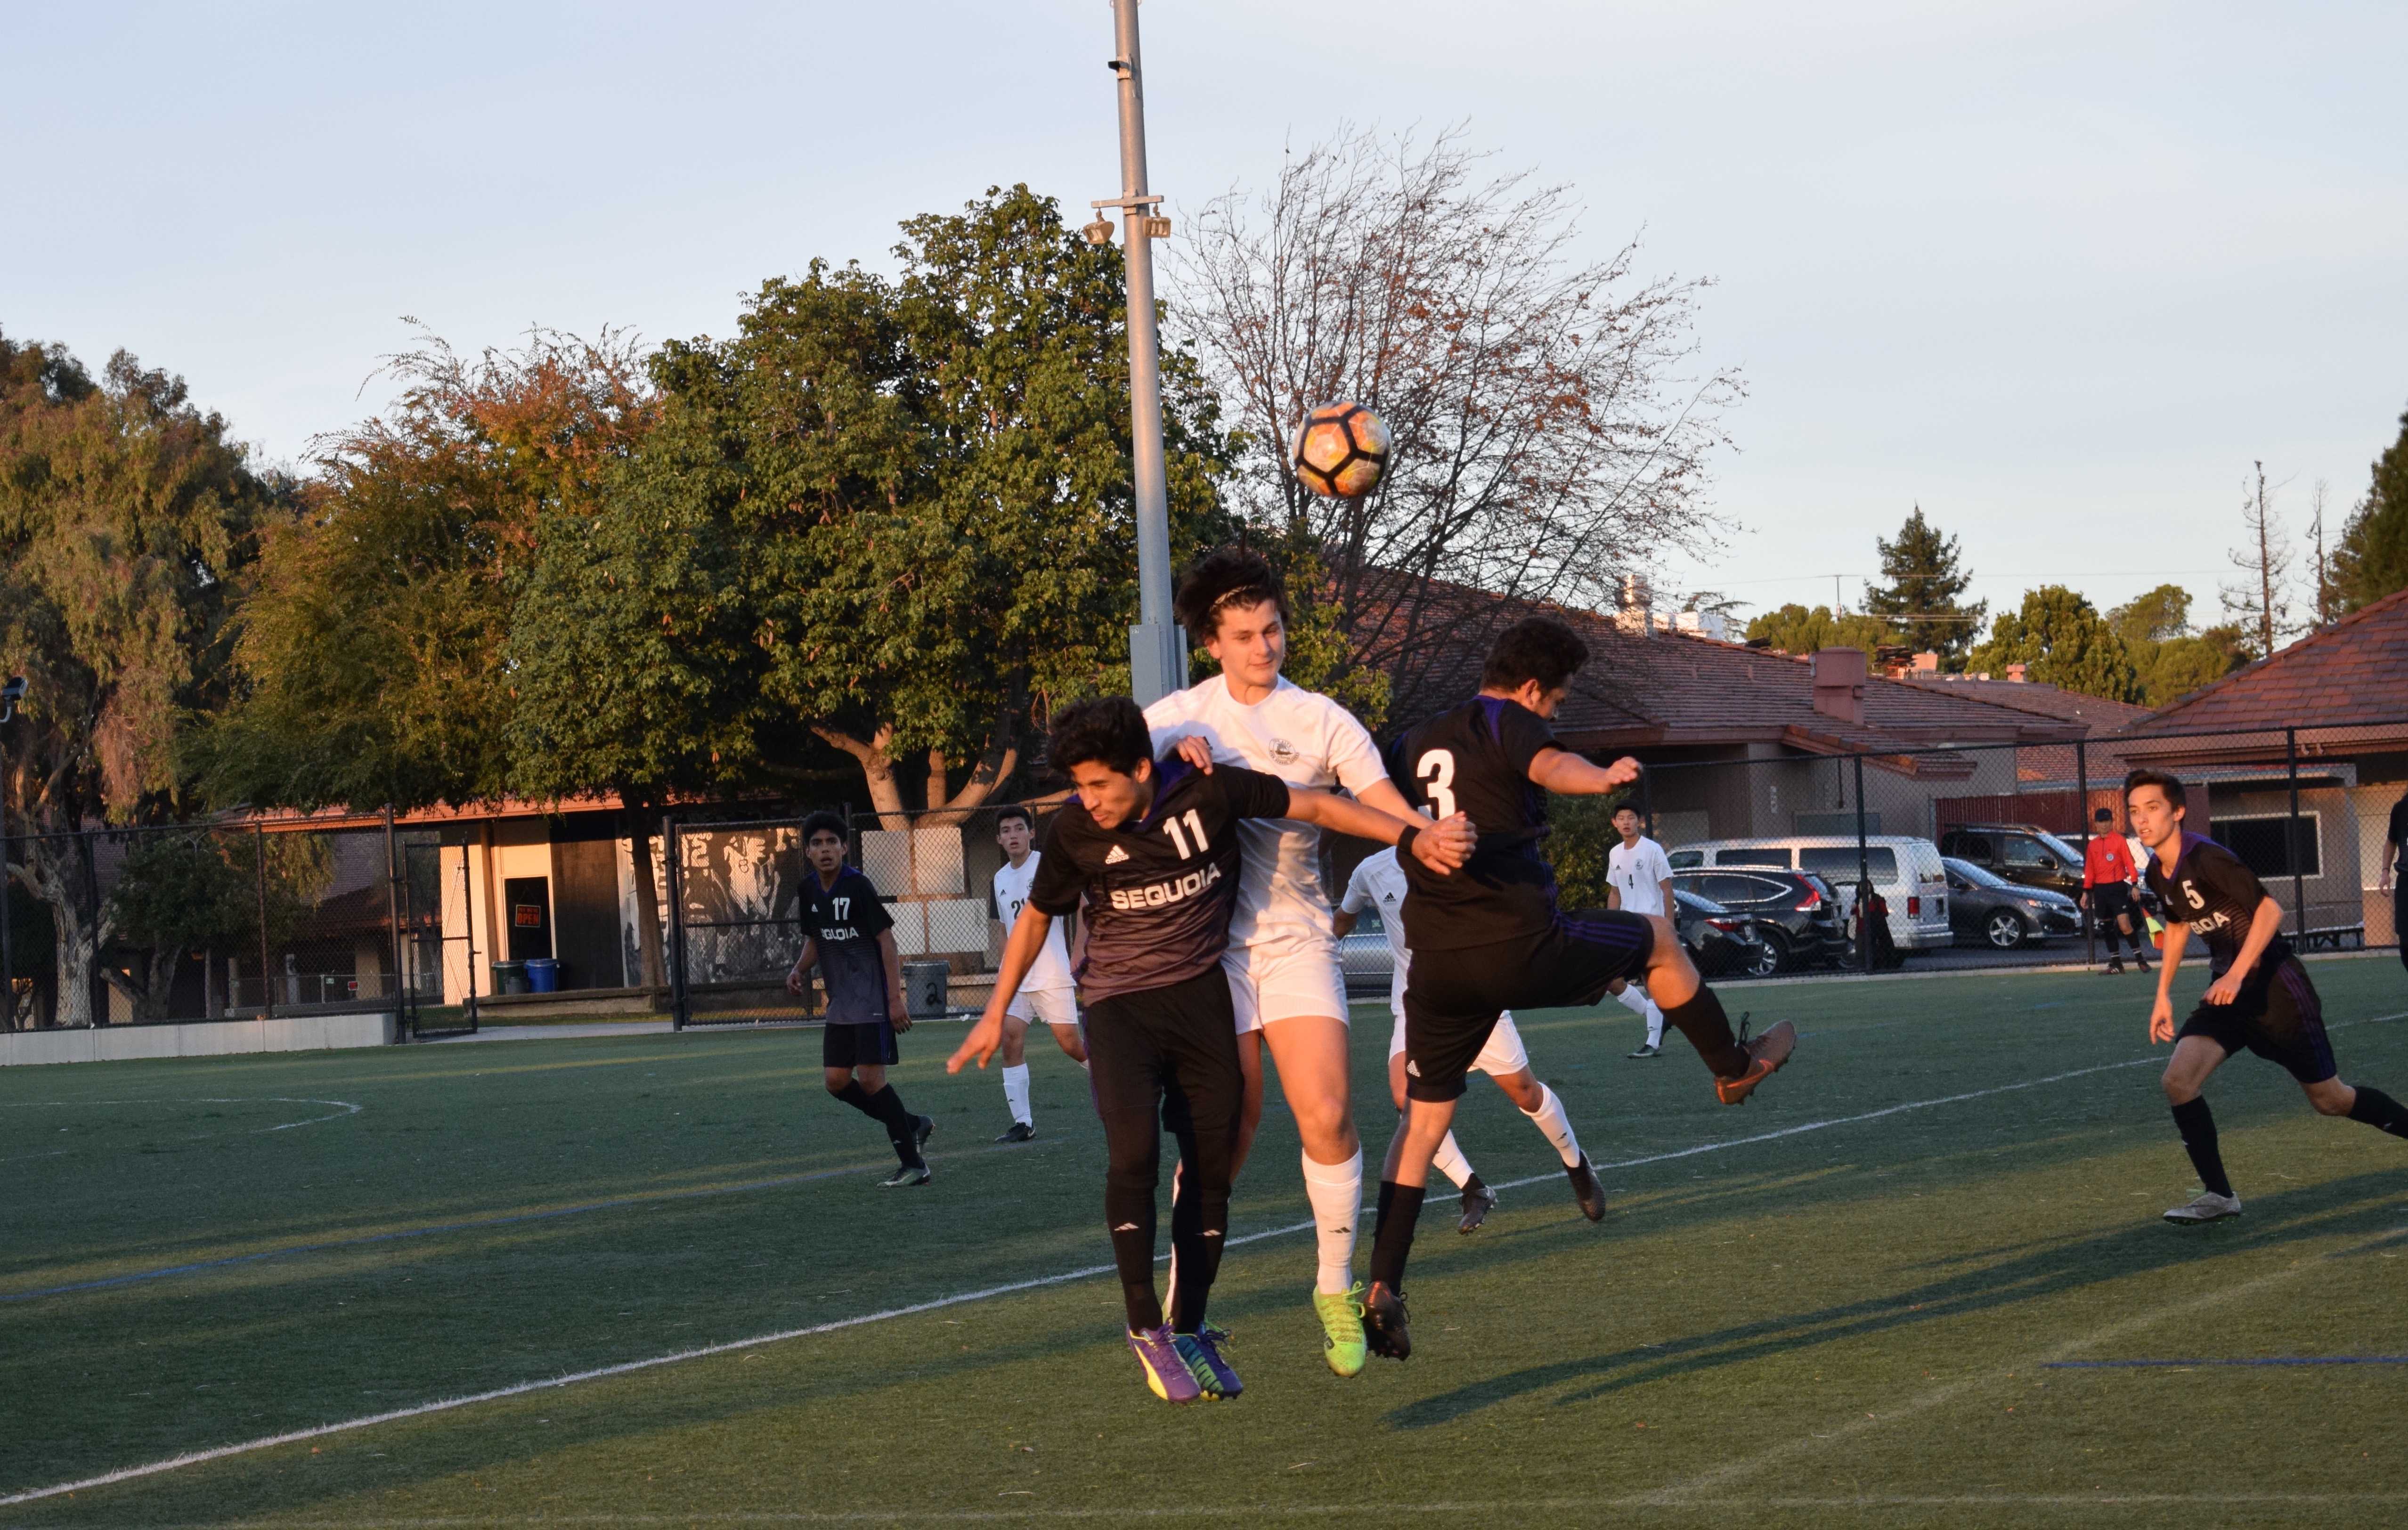 Senior Victor Magnussen heads the ball while blocking a Sequoia player during a game against Sequoia High School resulting in a Paly possession. Photo: Ankita Amberkar